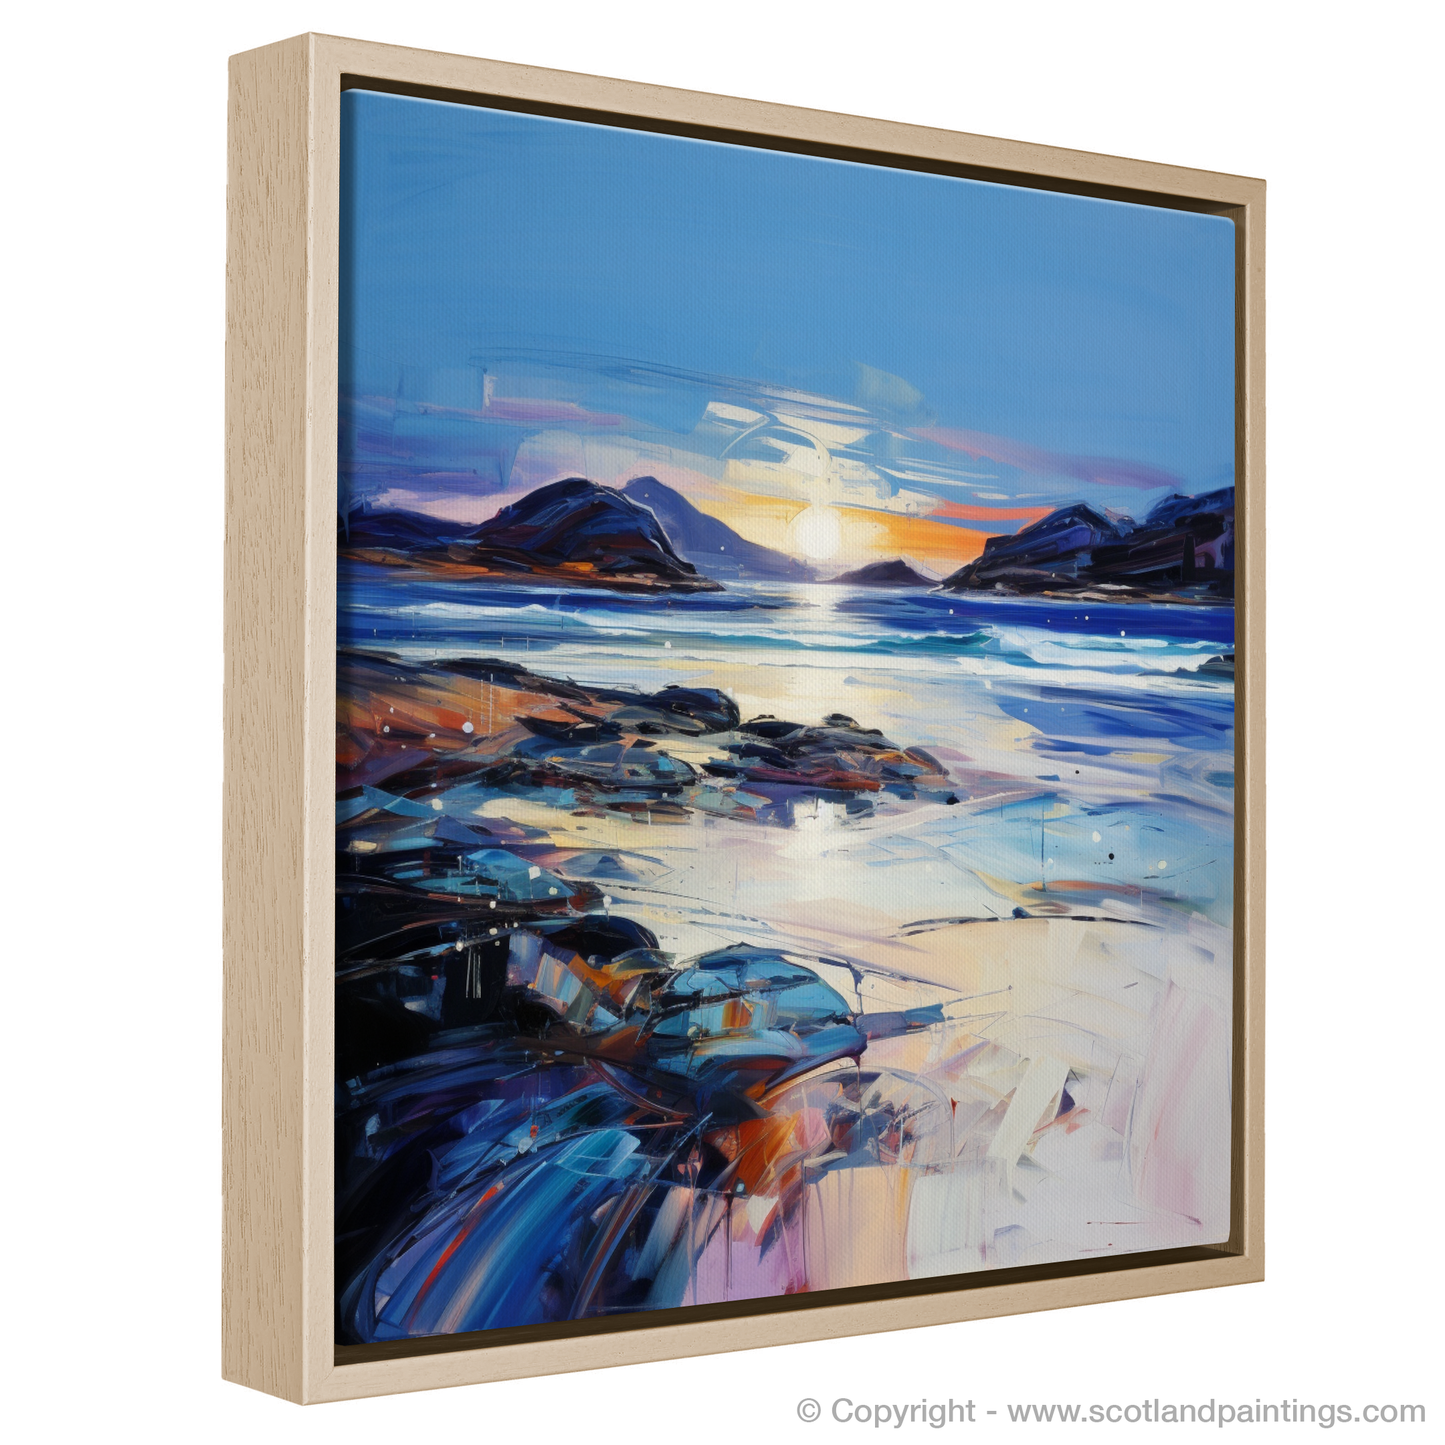 Painting and Art Print of Traigh Mhor at dusk entitled "Dusk at Traigh Mhor: An Expressionist Ode to Scottish Coves".